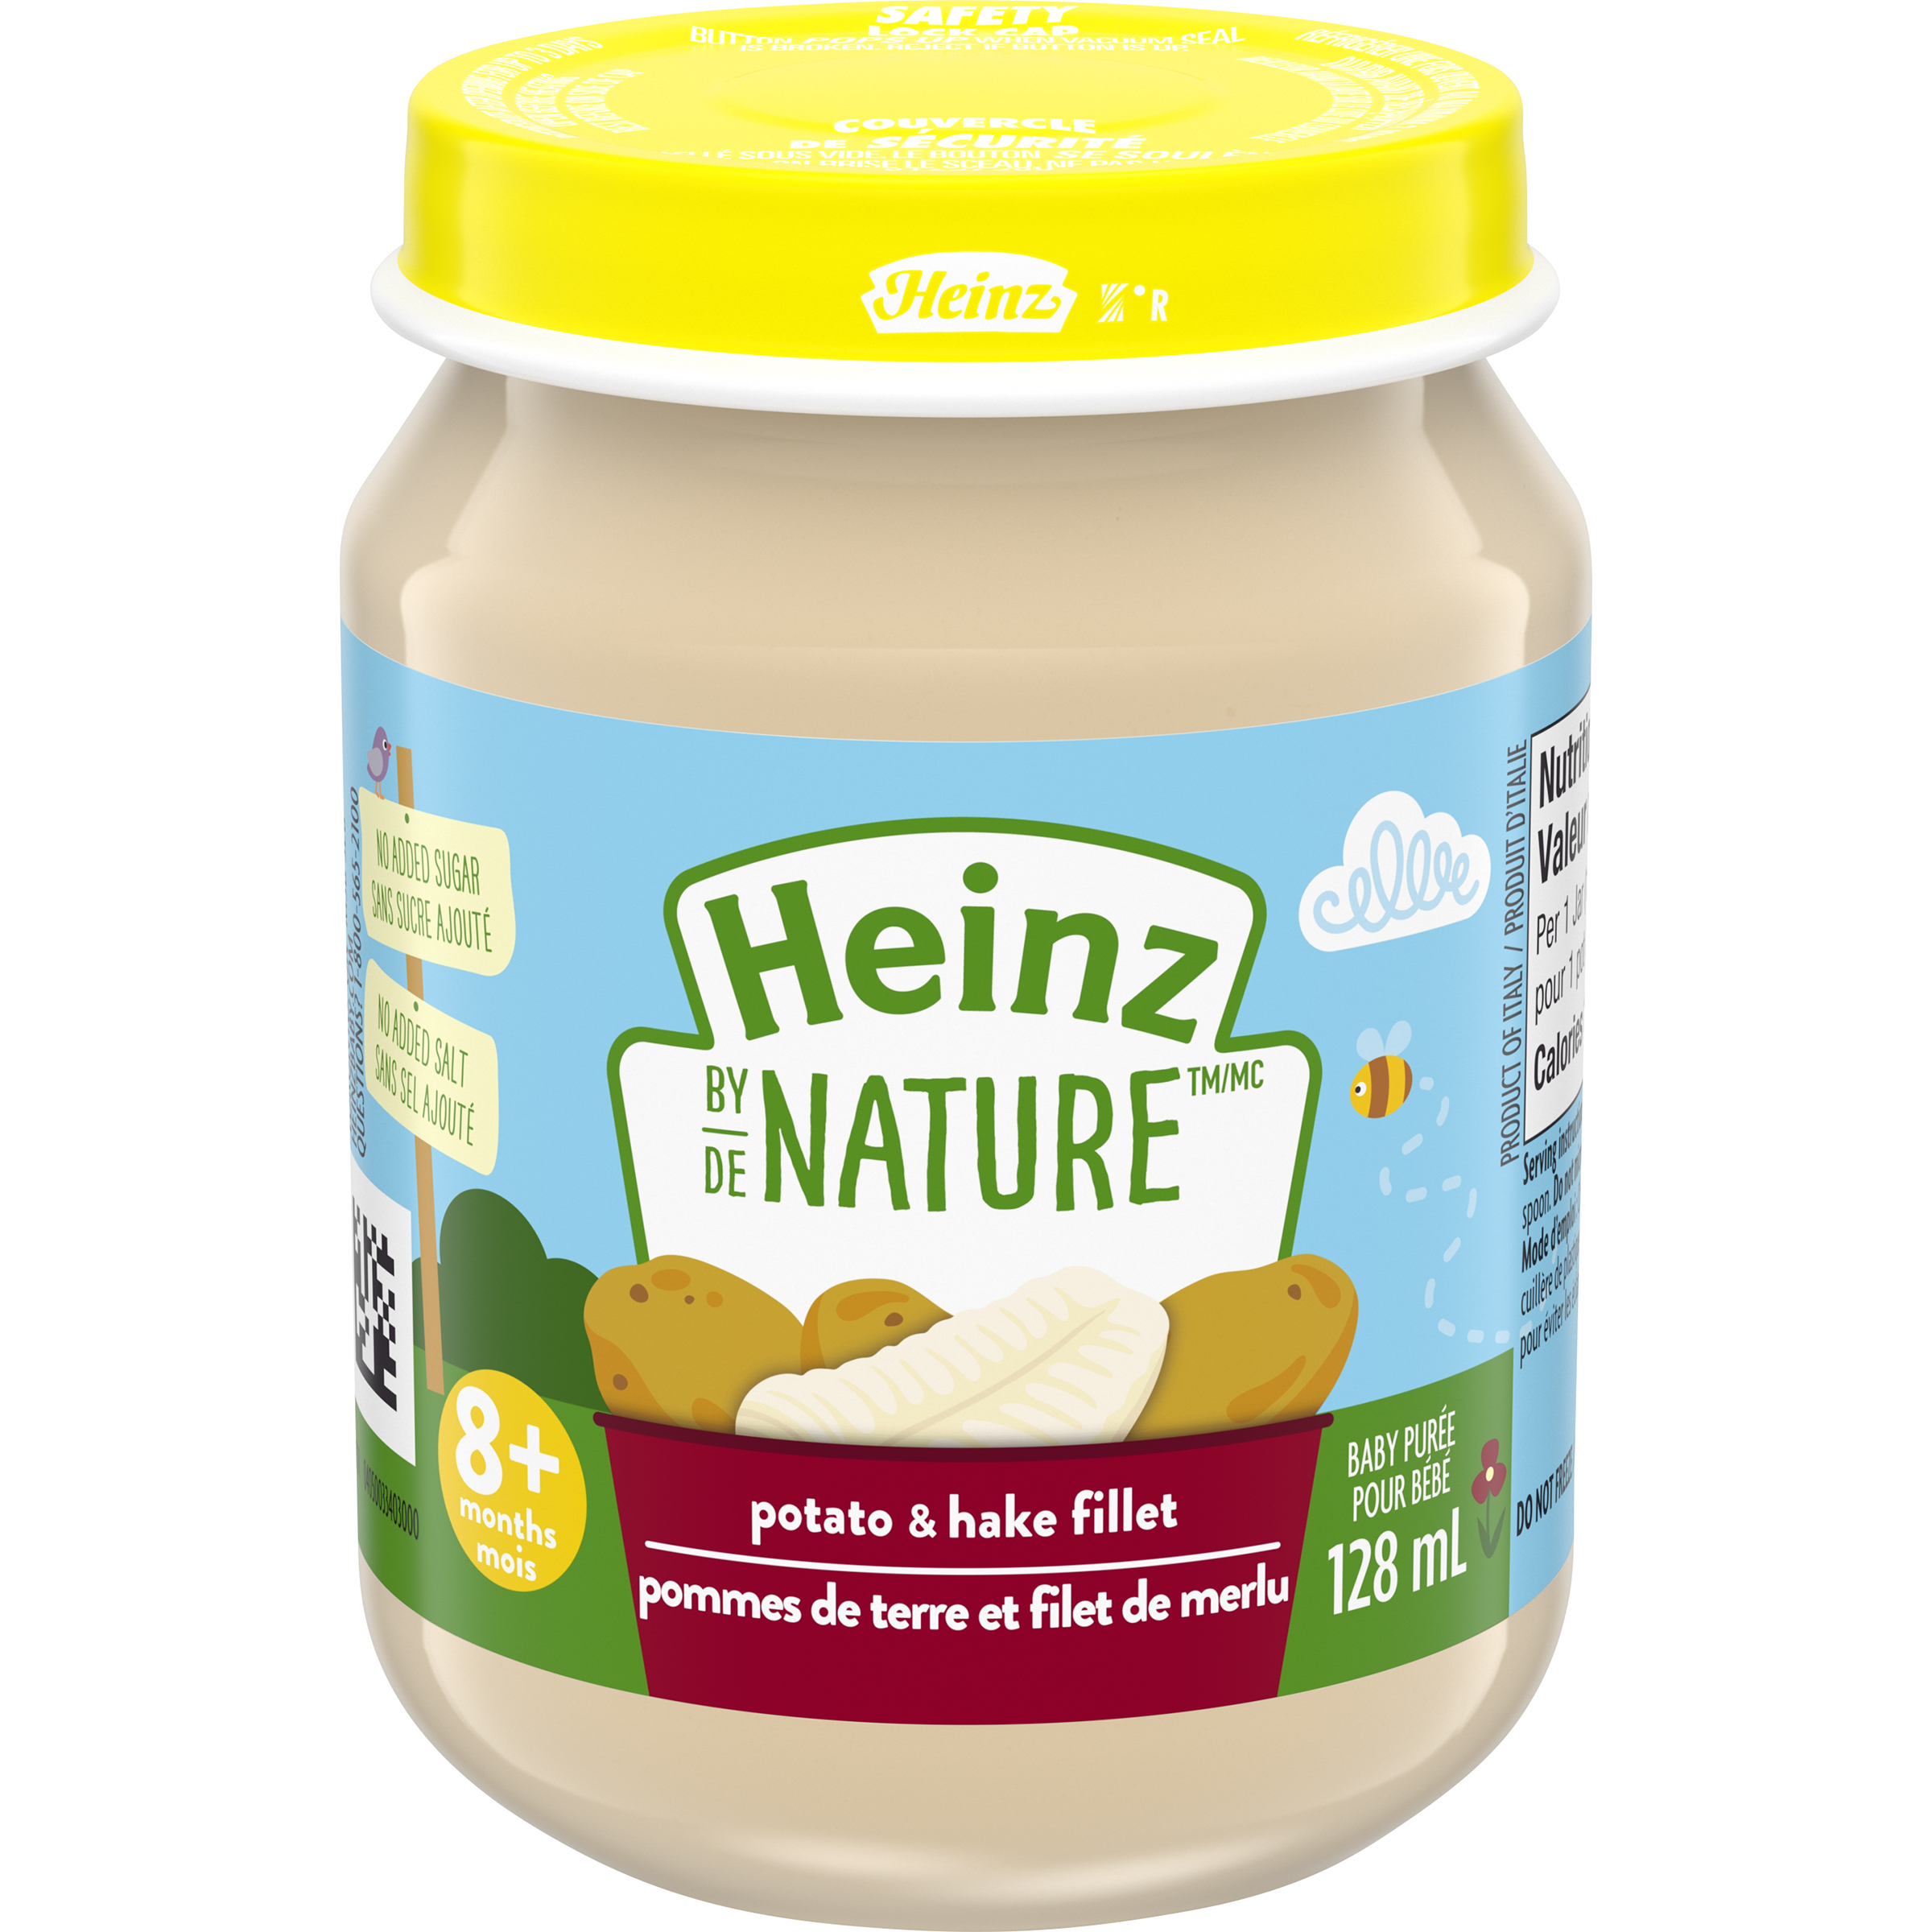 Heinz by Nature Baby Food - Potato & Hake Fillet Purée